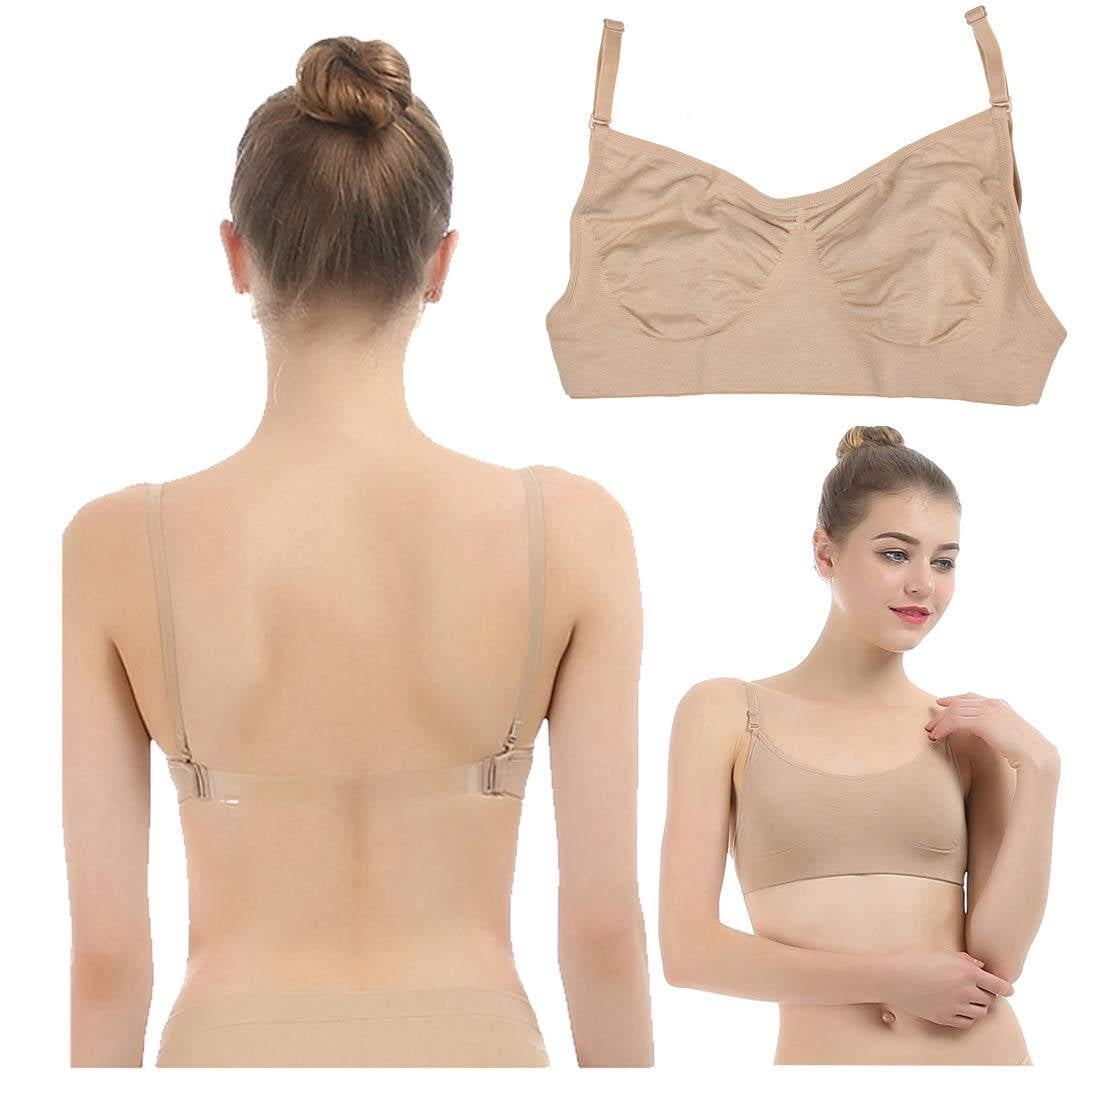 NIMONI Nude Dance Clear Back Bra with Transition Straps, Girls and Women  Beige No Sponge Seamless Bra for Ballet Performance